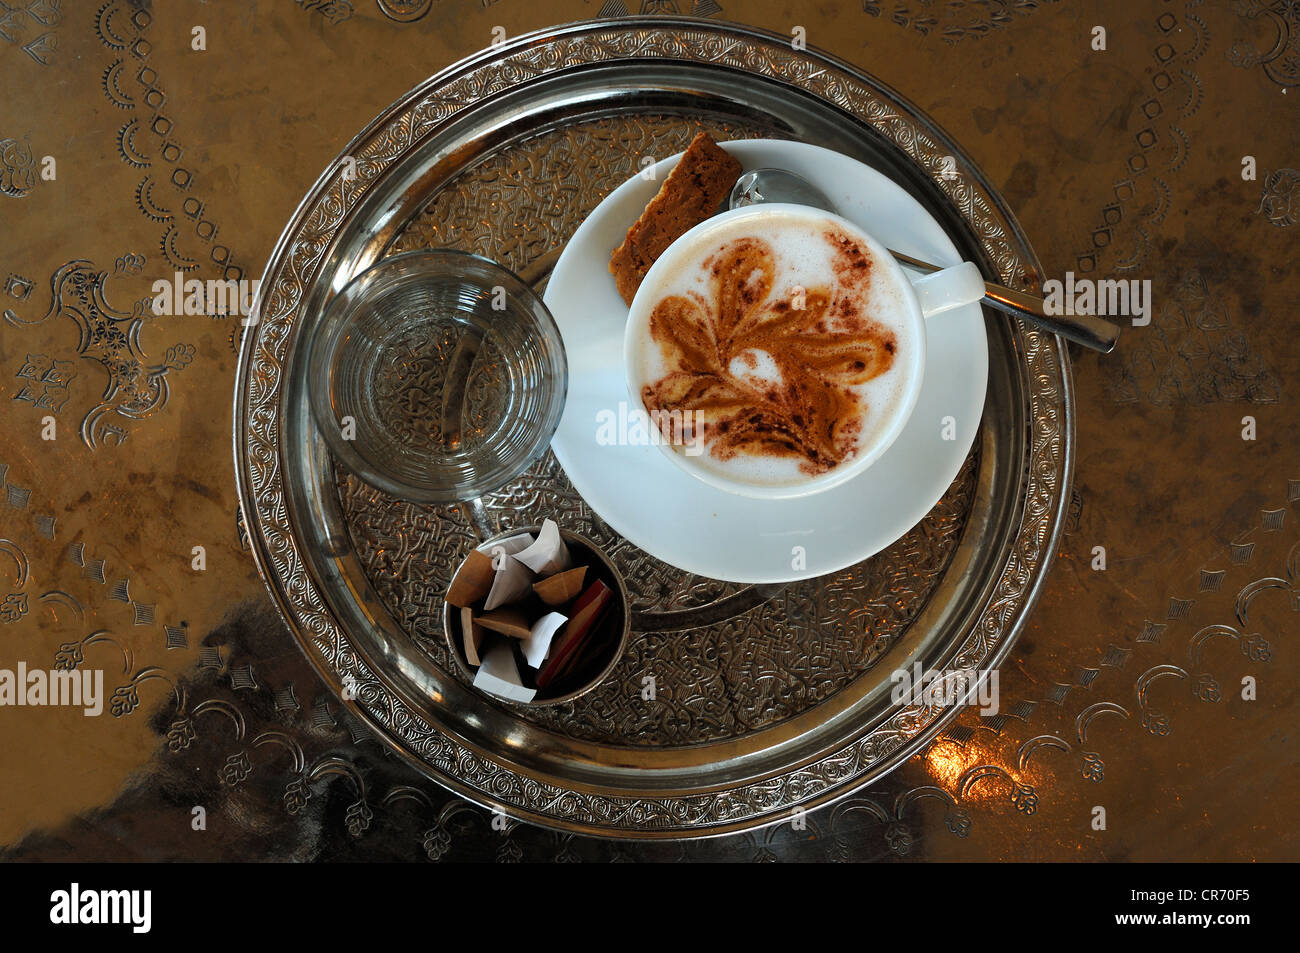 Cup of Cappuccino, glass of water and sugar sachets served on a round silver tablet with engravings, Vienna, Austria, Europe Stock Photo